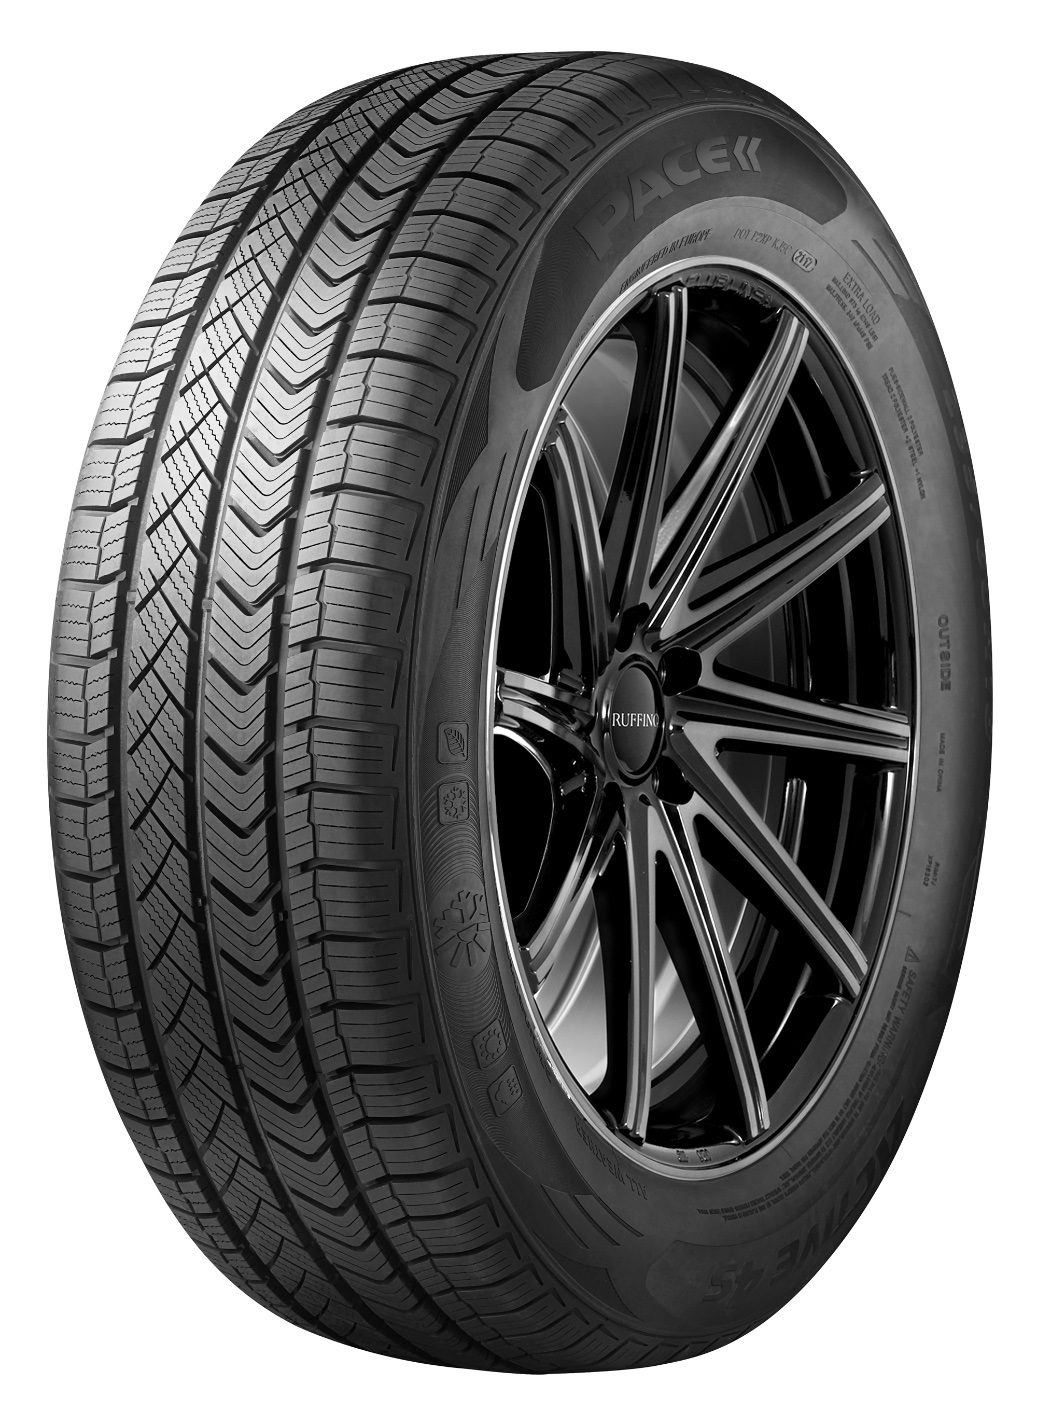 Gomme Nuove Pace 225/50 R17 98V ACTIVE 4S XL M+S pneumatici nuovi All Season